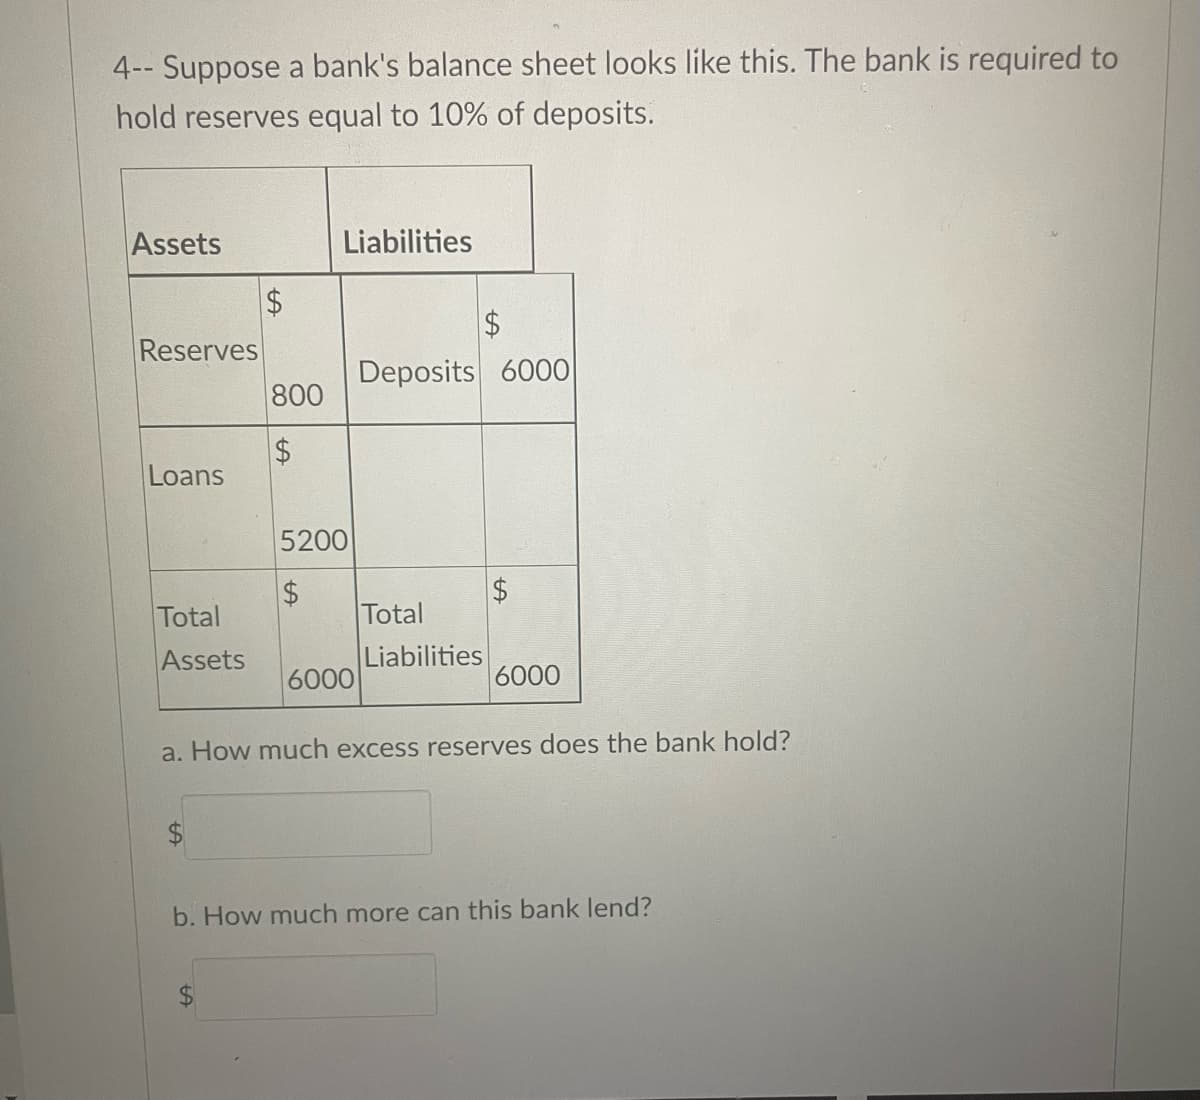 4-- Suppose a bank's balance sheet looks like this. The bank is required to
hold reserves equal to 10% of deposits.
Assets
Reserves
Loans
Total
Assets
$
800
$
Liabilities
5200
$
6000
$
Deposits 6000
Total
Liabilities
LA
6000
a. How much excess reserves does the bank hold?
b. How much more can this bank lend?